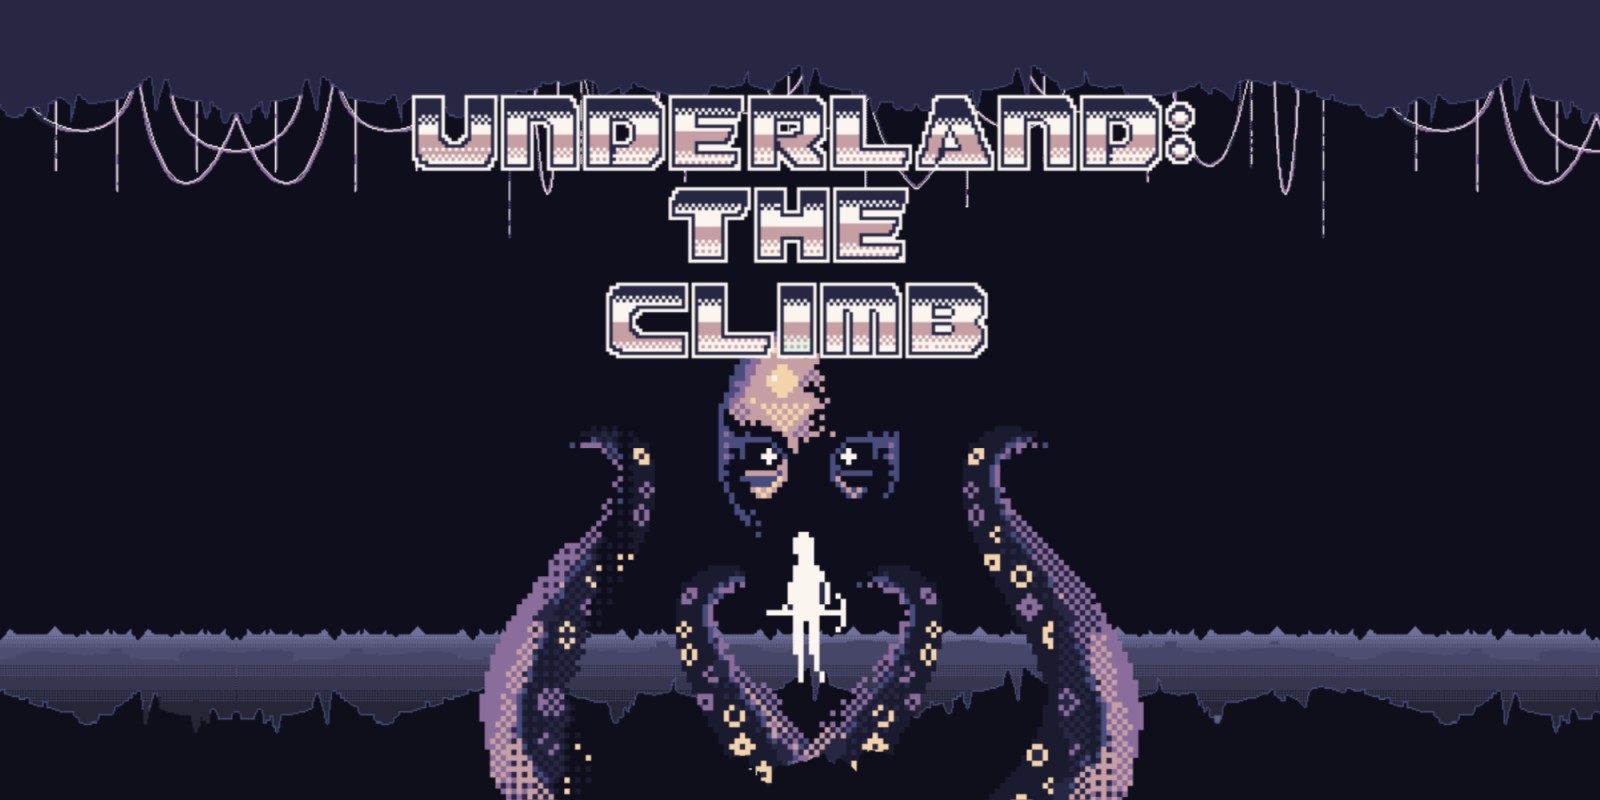 Underland the clumb Game News Indie Game Fans News